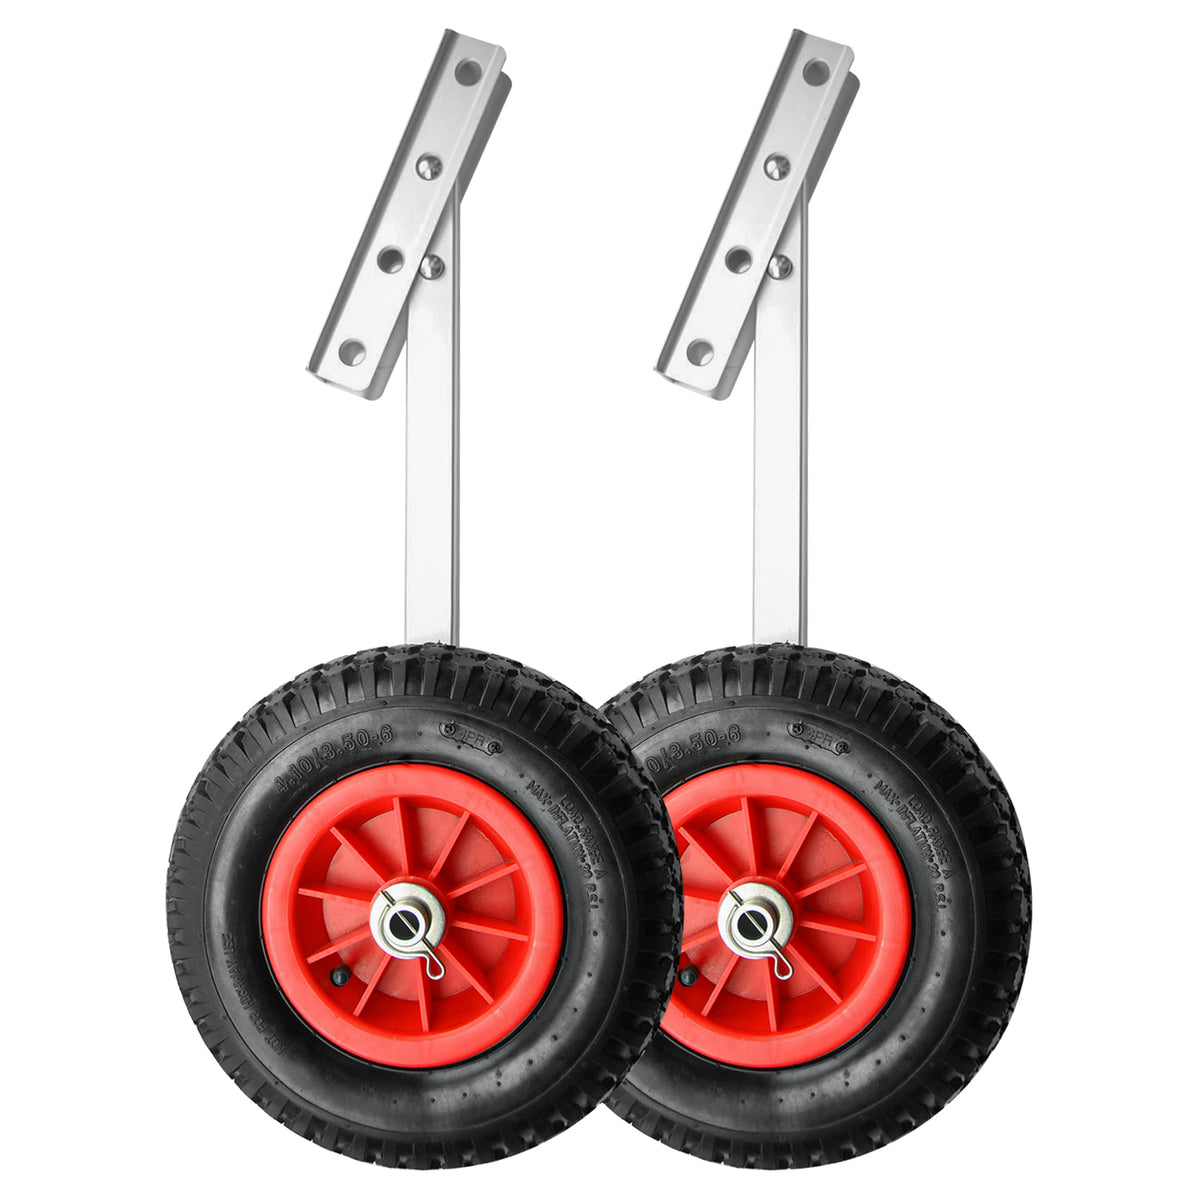 Aluminium Launching Wheels for inflatable boat dinghy